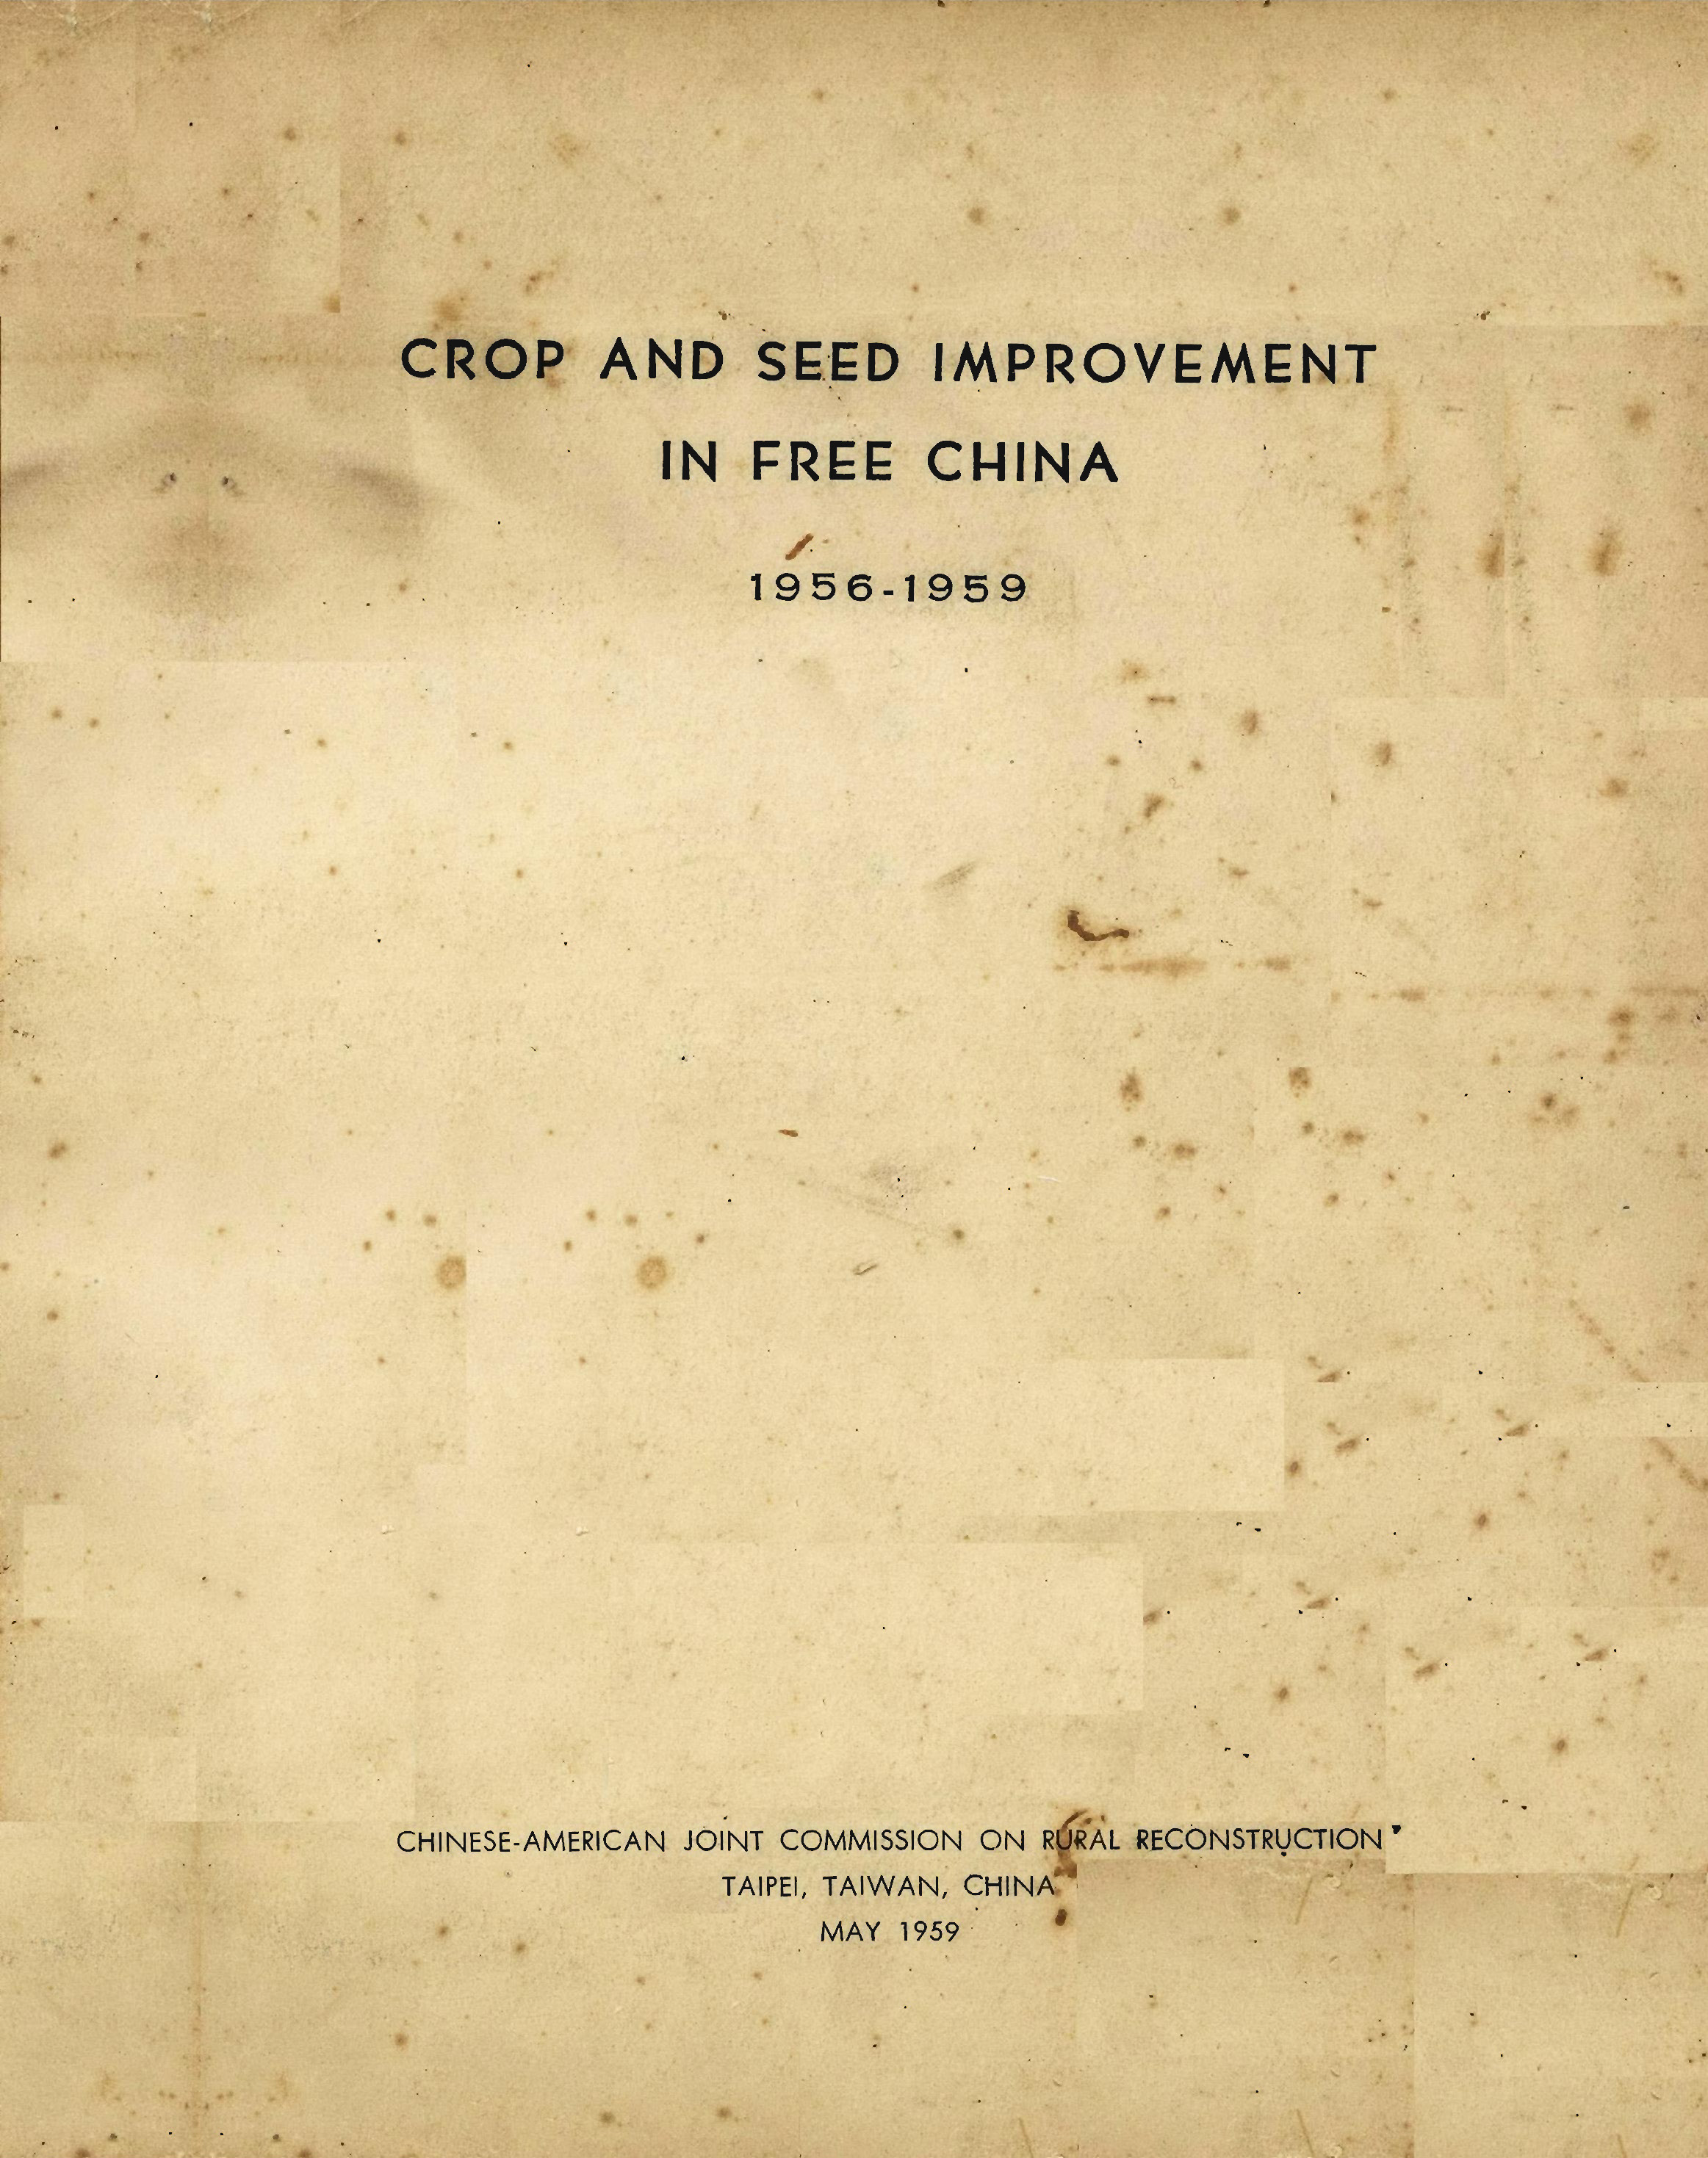 CROP AND SEED IMPROVEMENT IN FREE CHINA  1956-1959